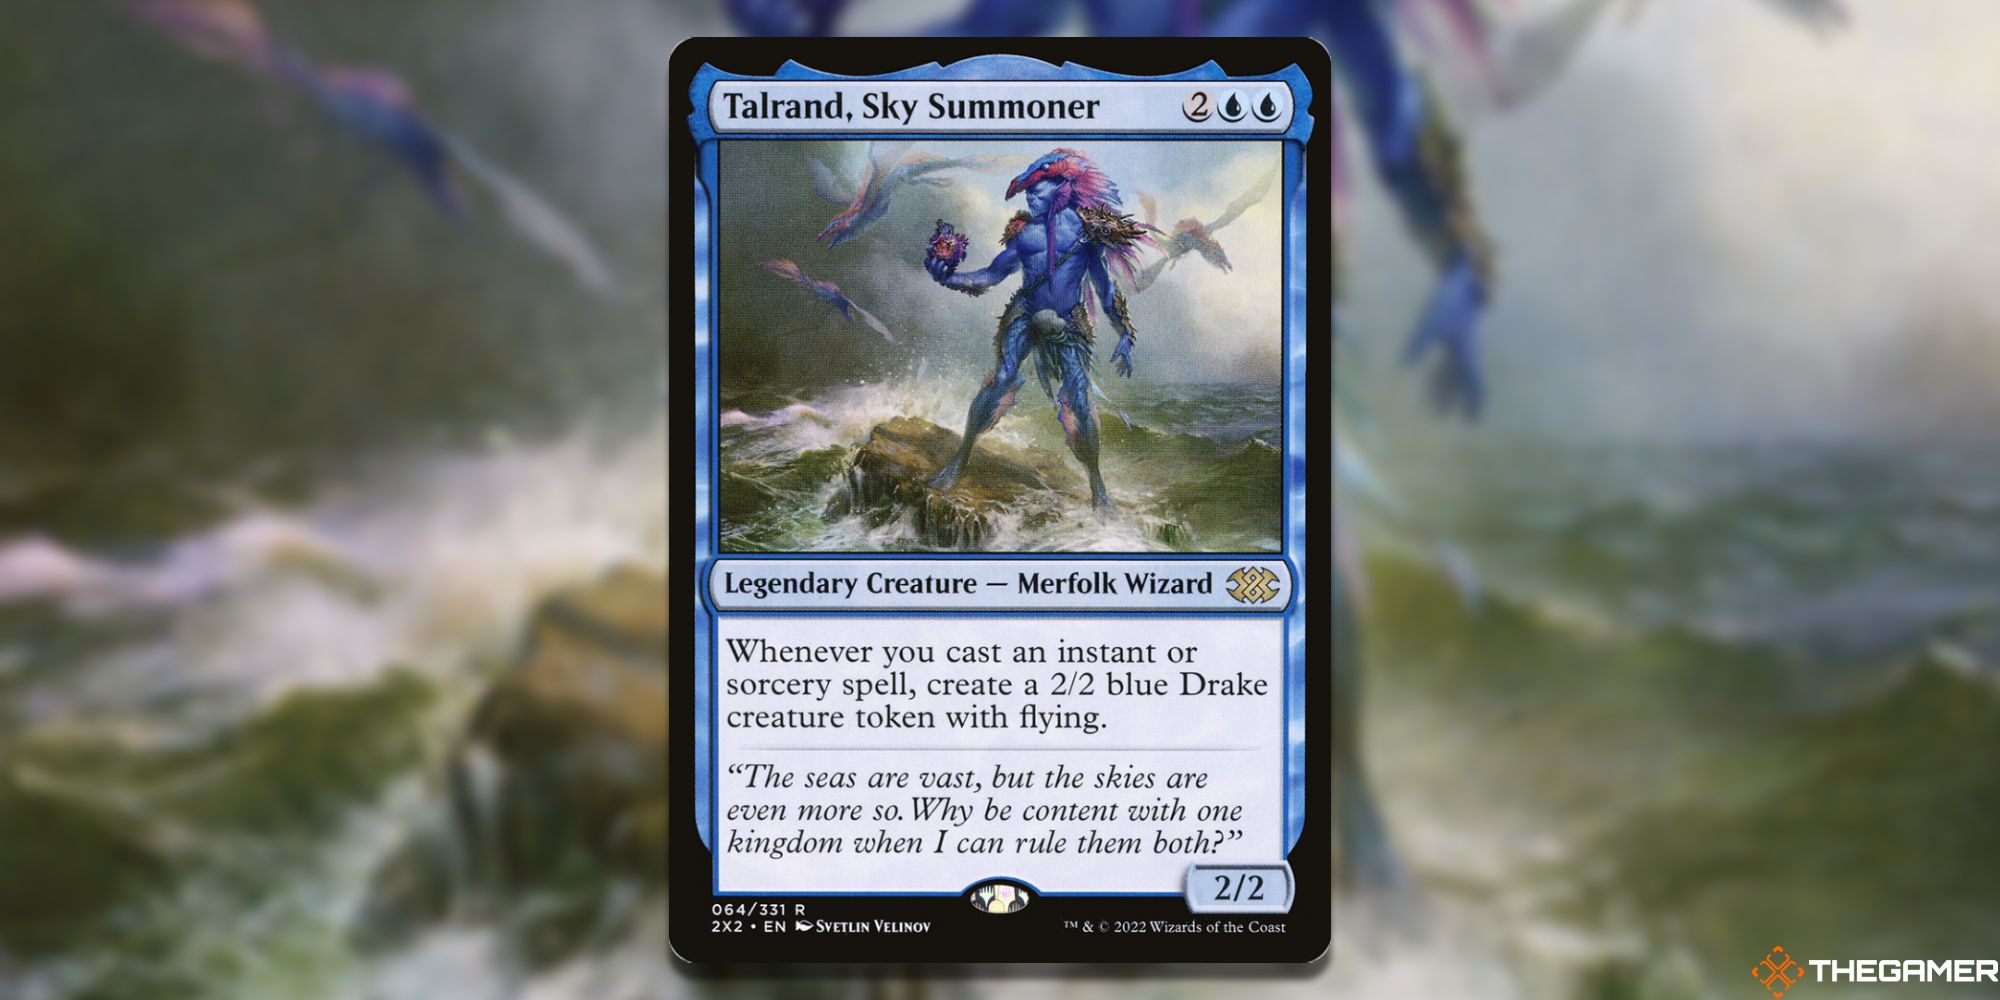 Image of the Talrand, Sky Summoner card in Magic: The Gathering, with art by Svetlin Velinov